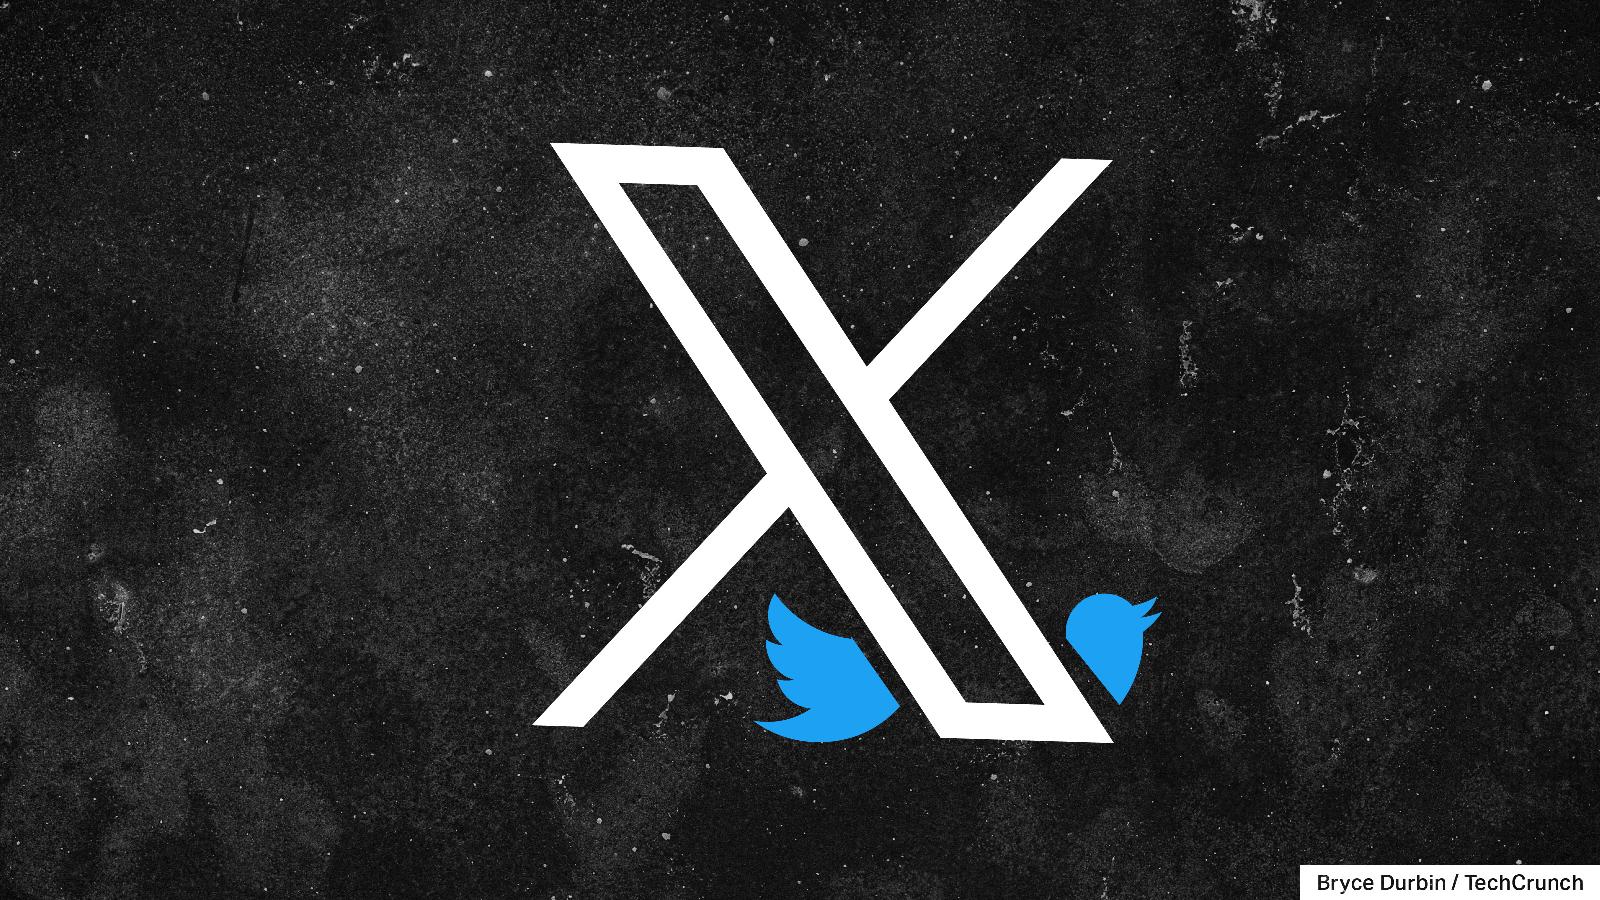 App Store users are downrating Twitter’s rebranding to X with 1-star reviews